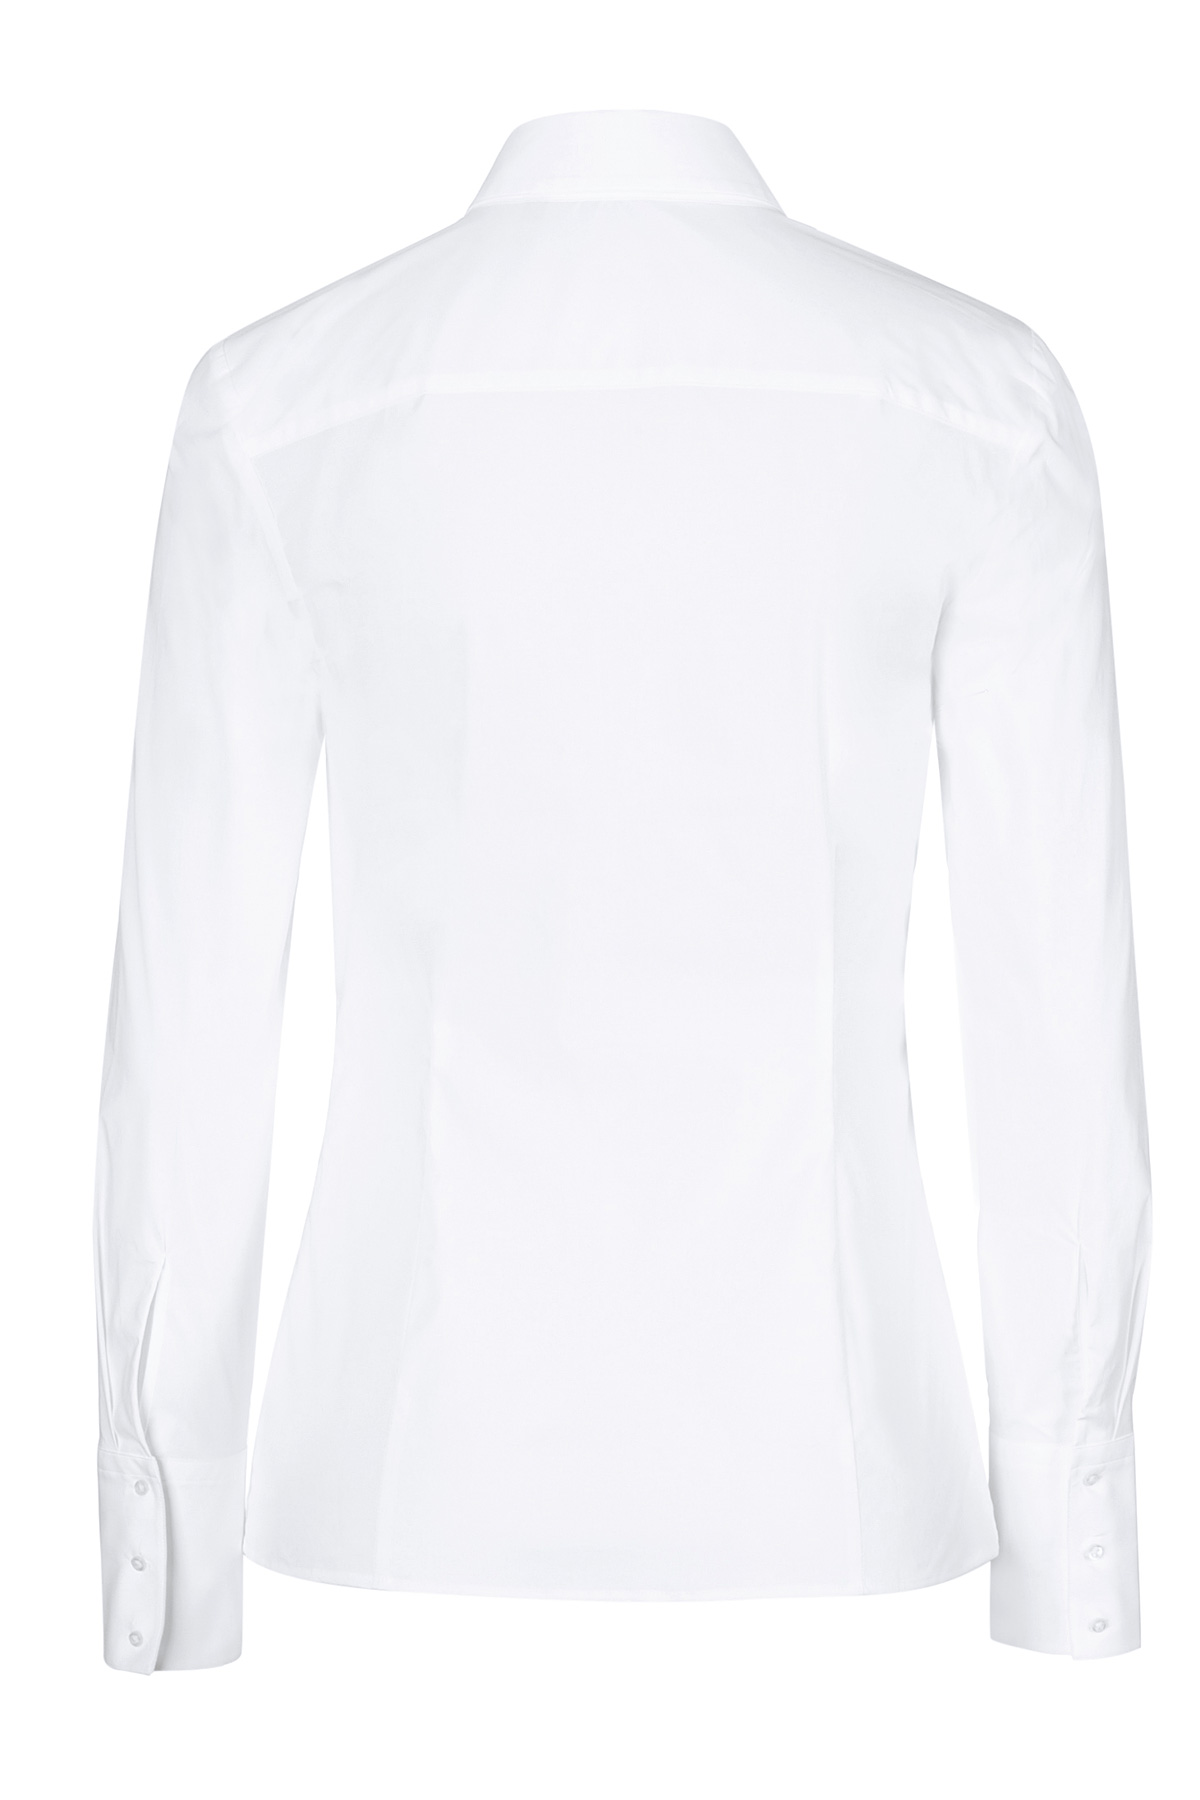 Lyst - Hugo Stretch Cotton Blouse in White in White